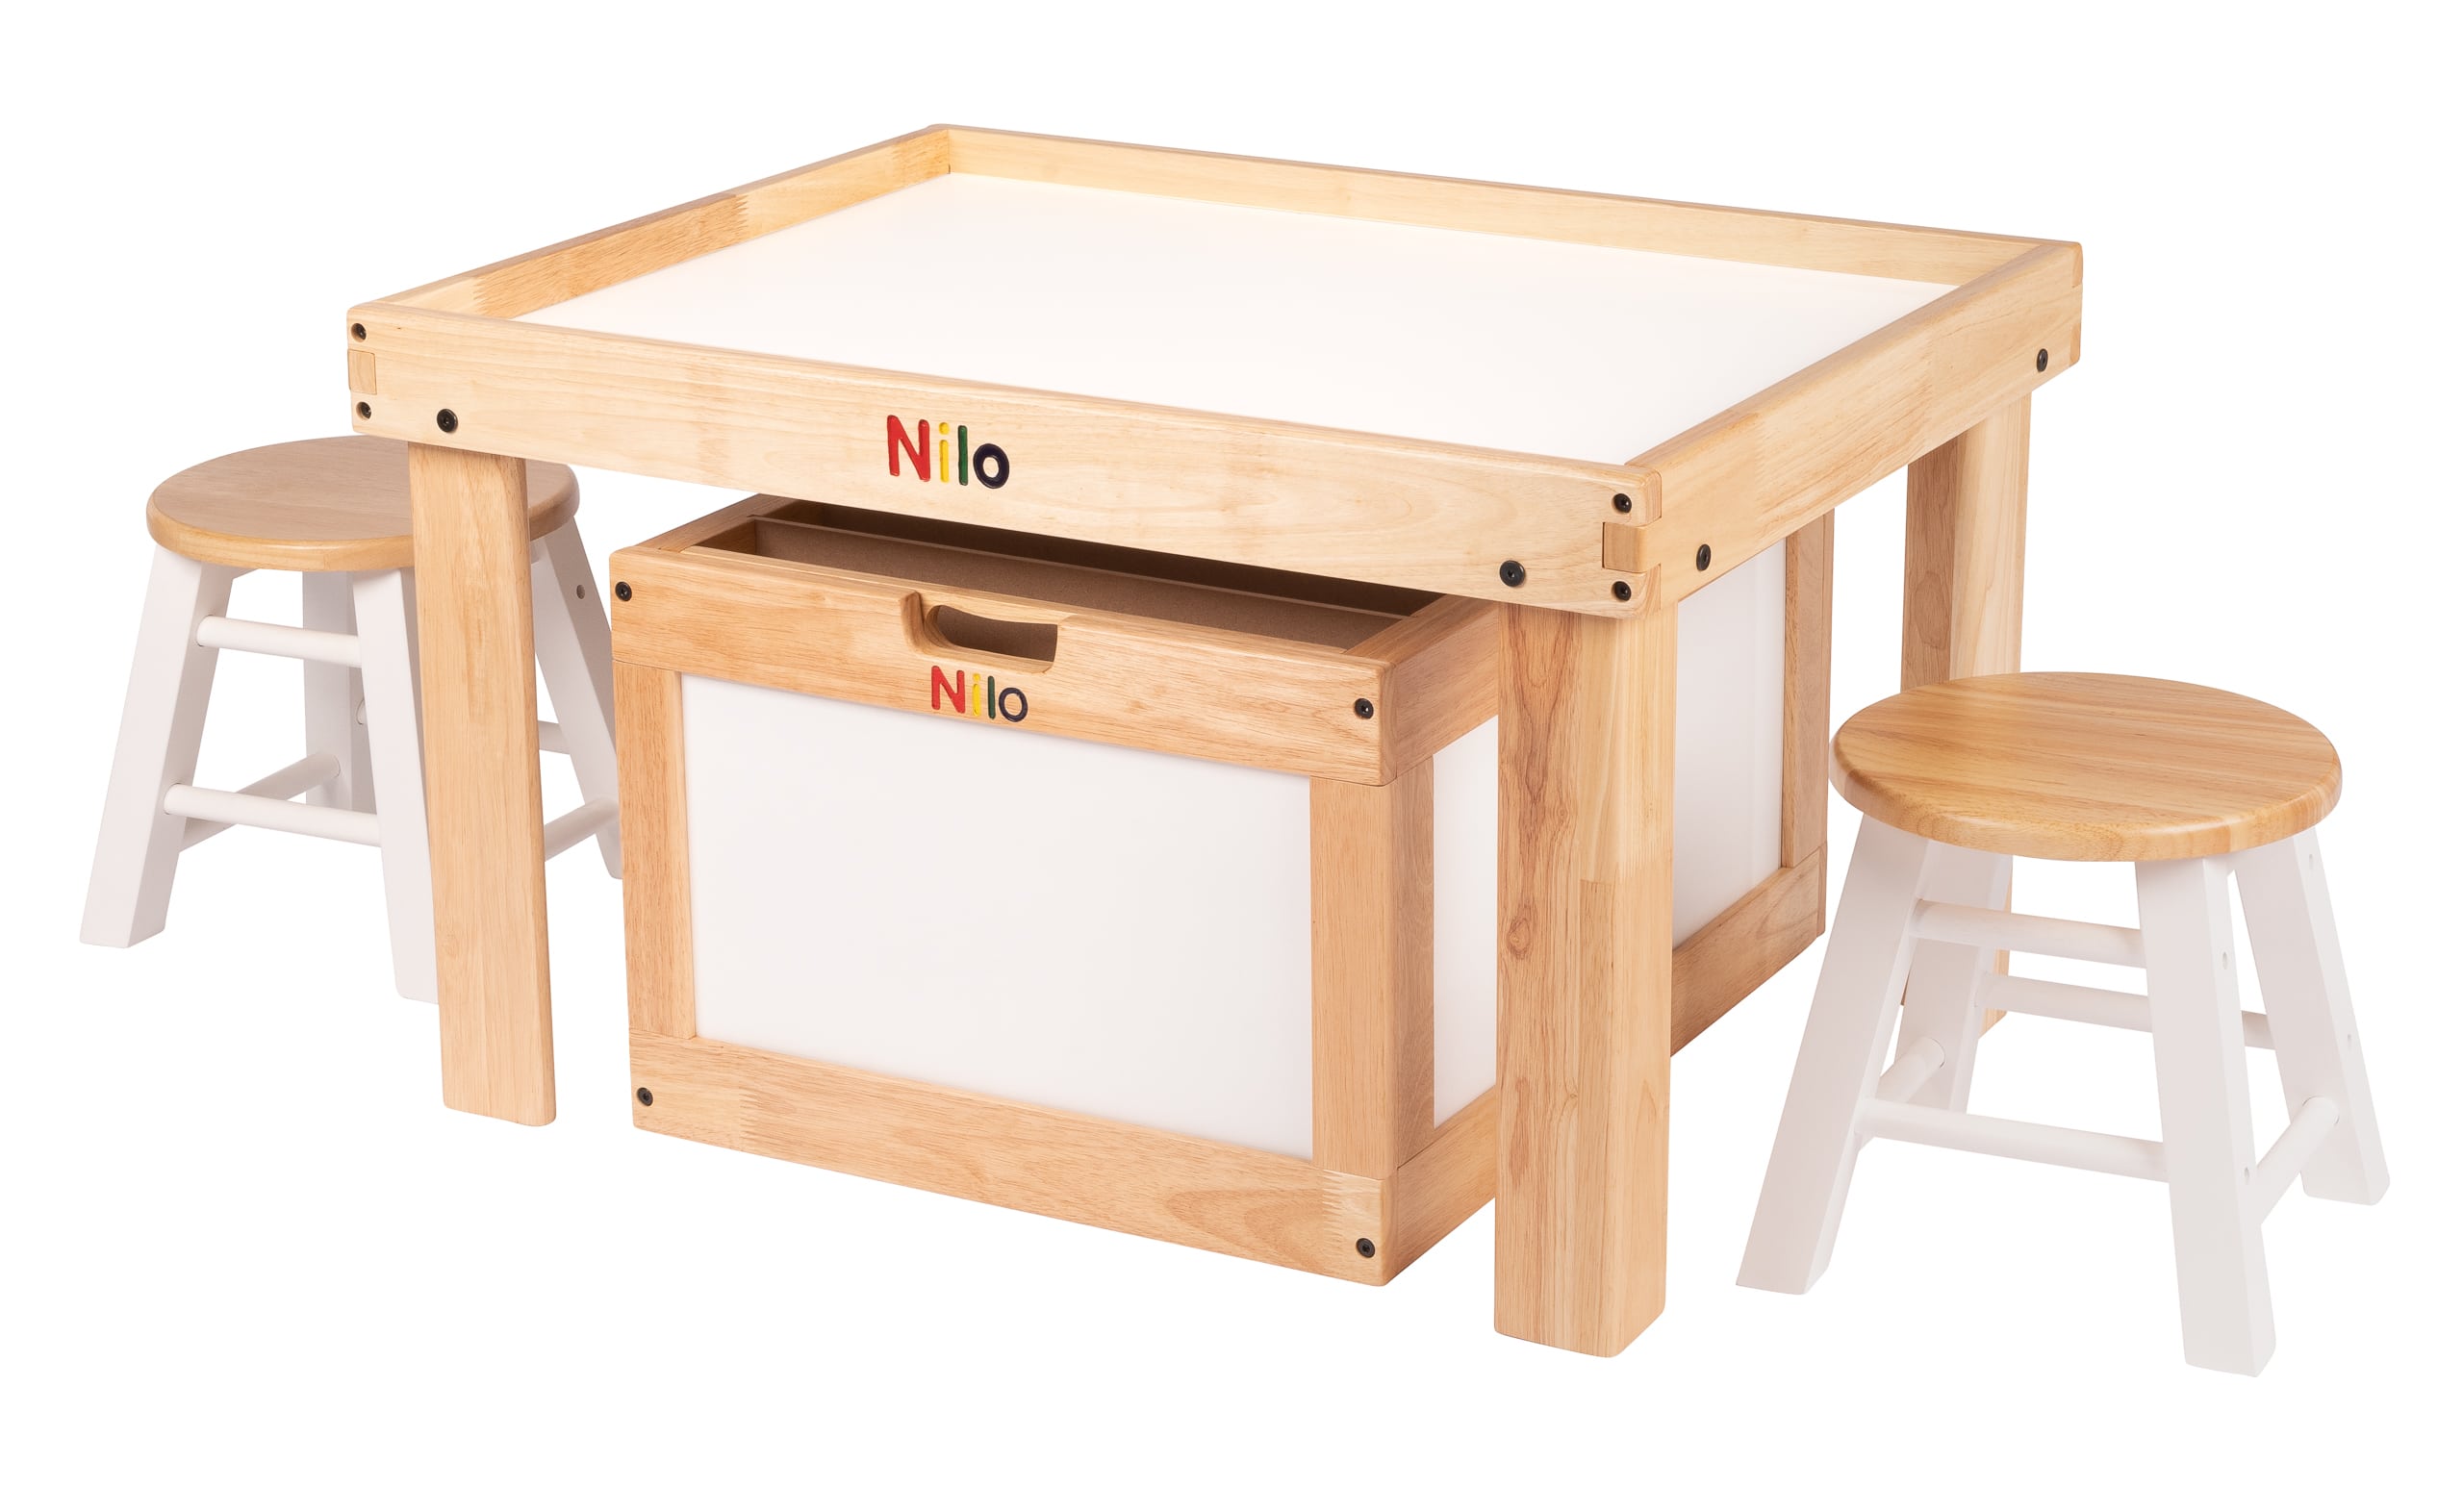 Nilo Table, Lego Table, Play Table, Kids Furniture